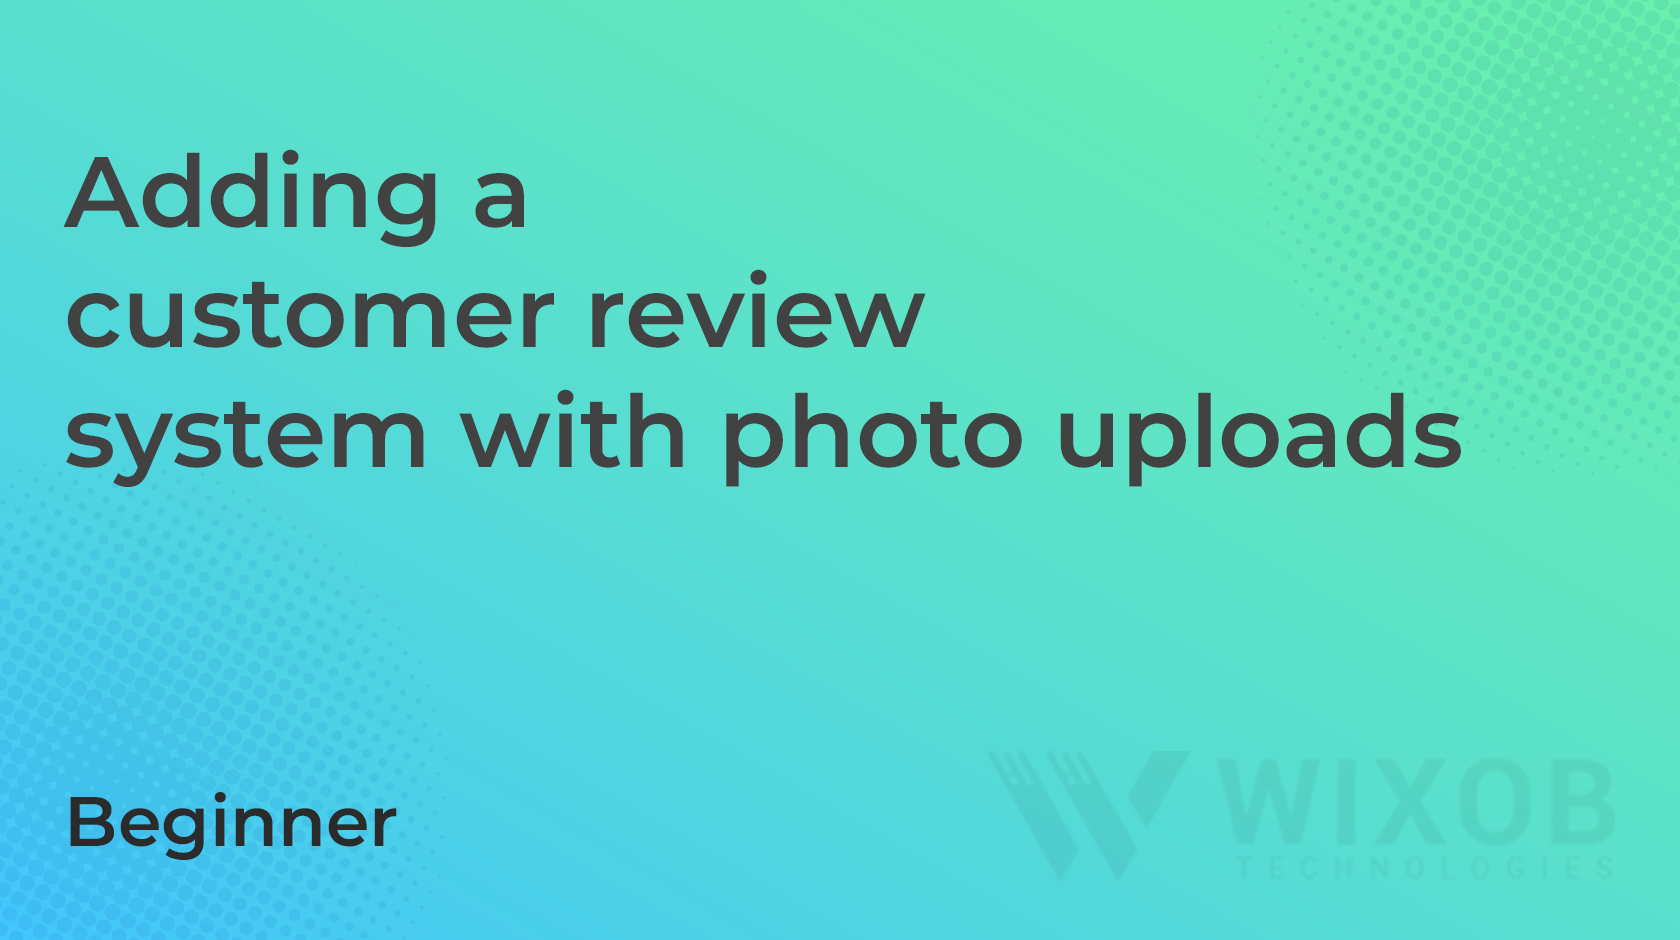 Adding a customer review system with photo uploads